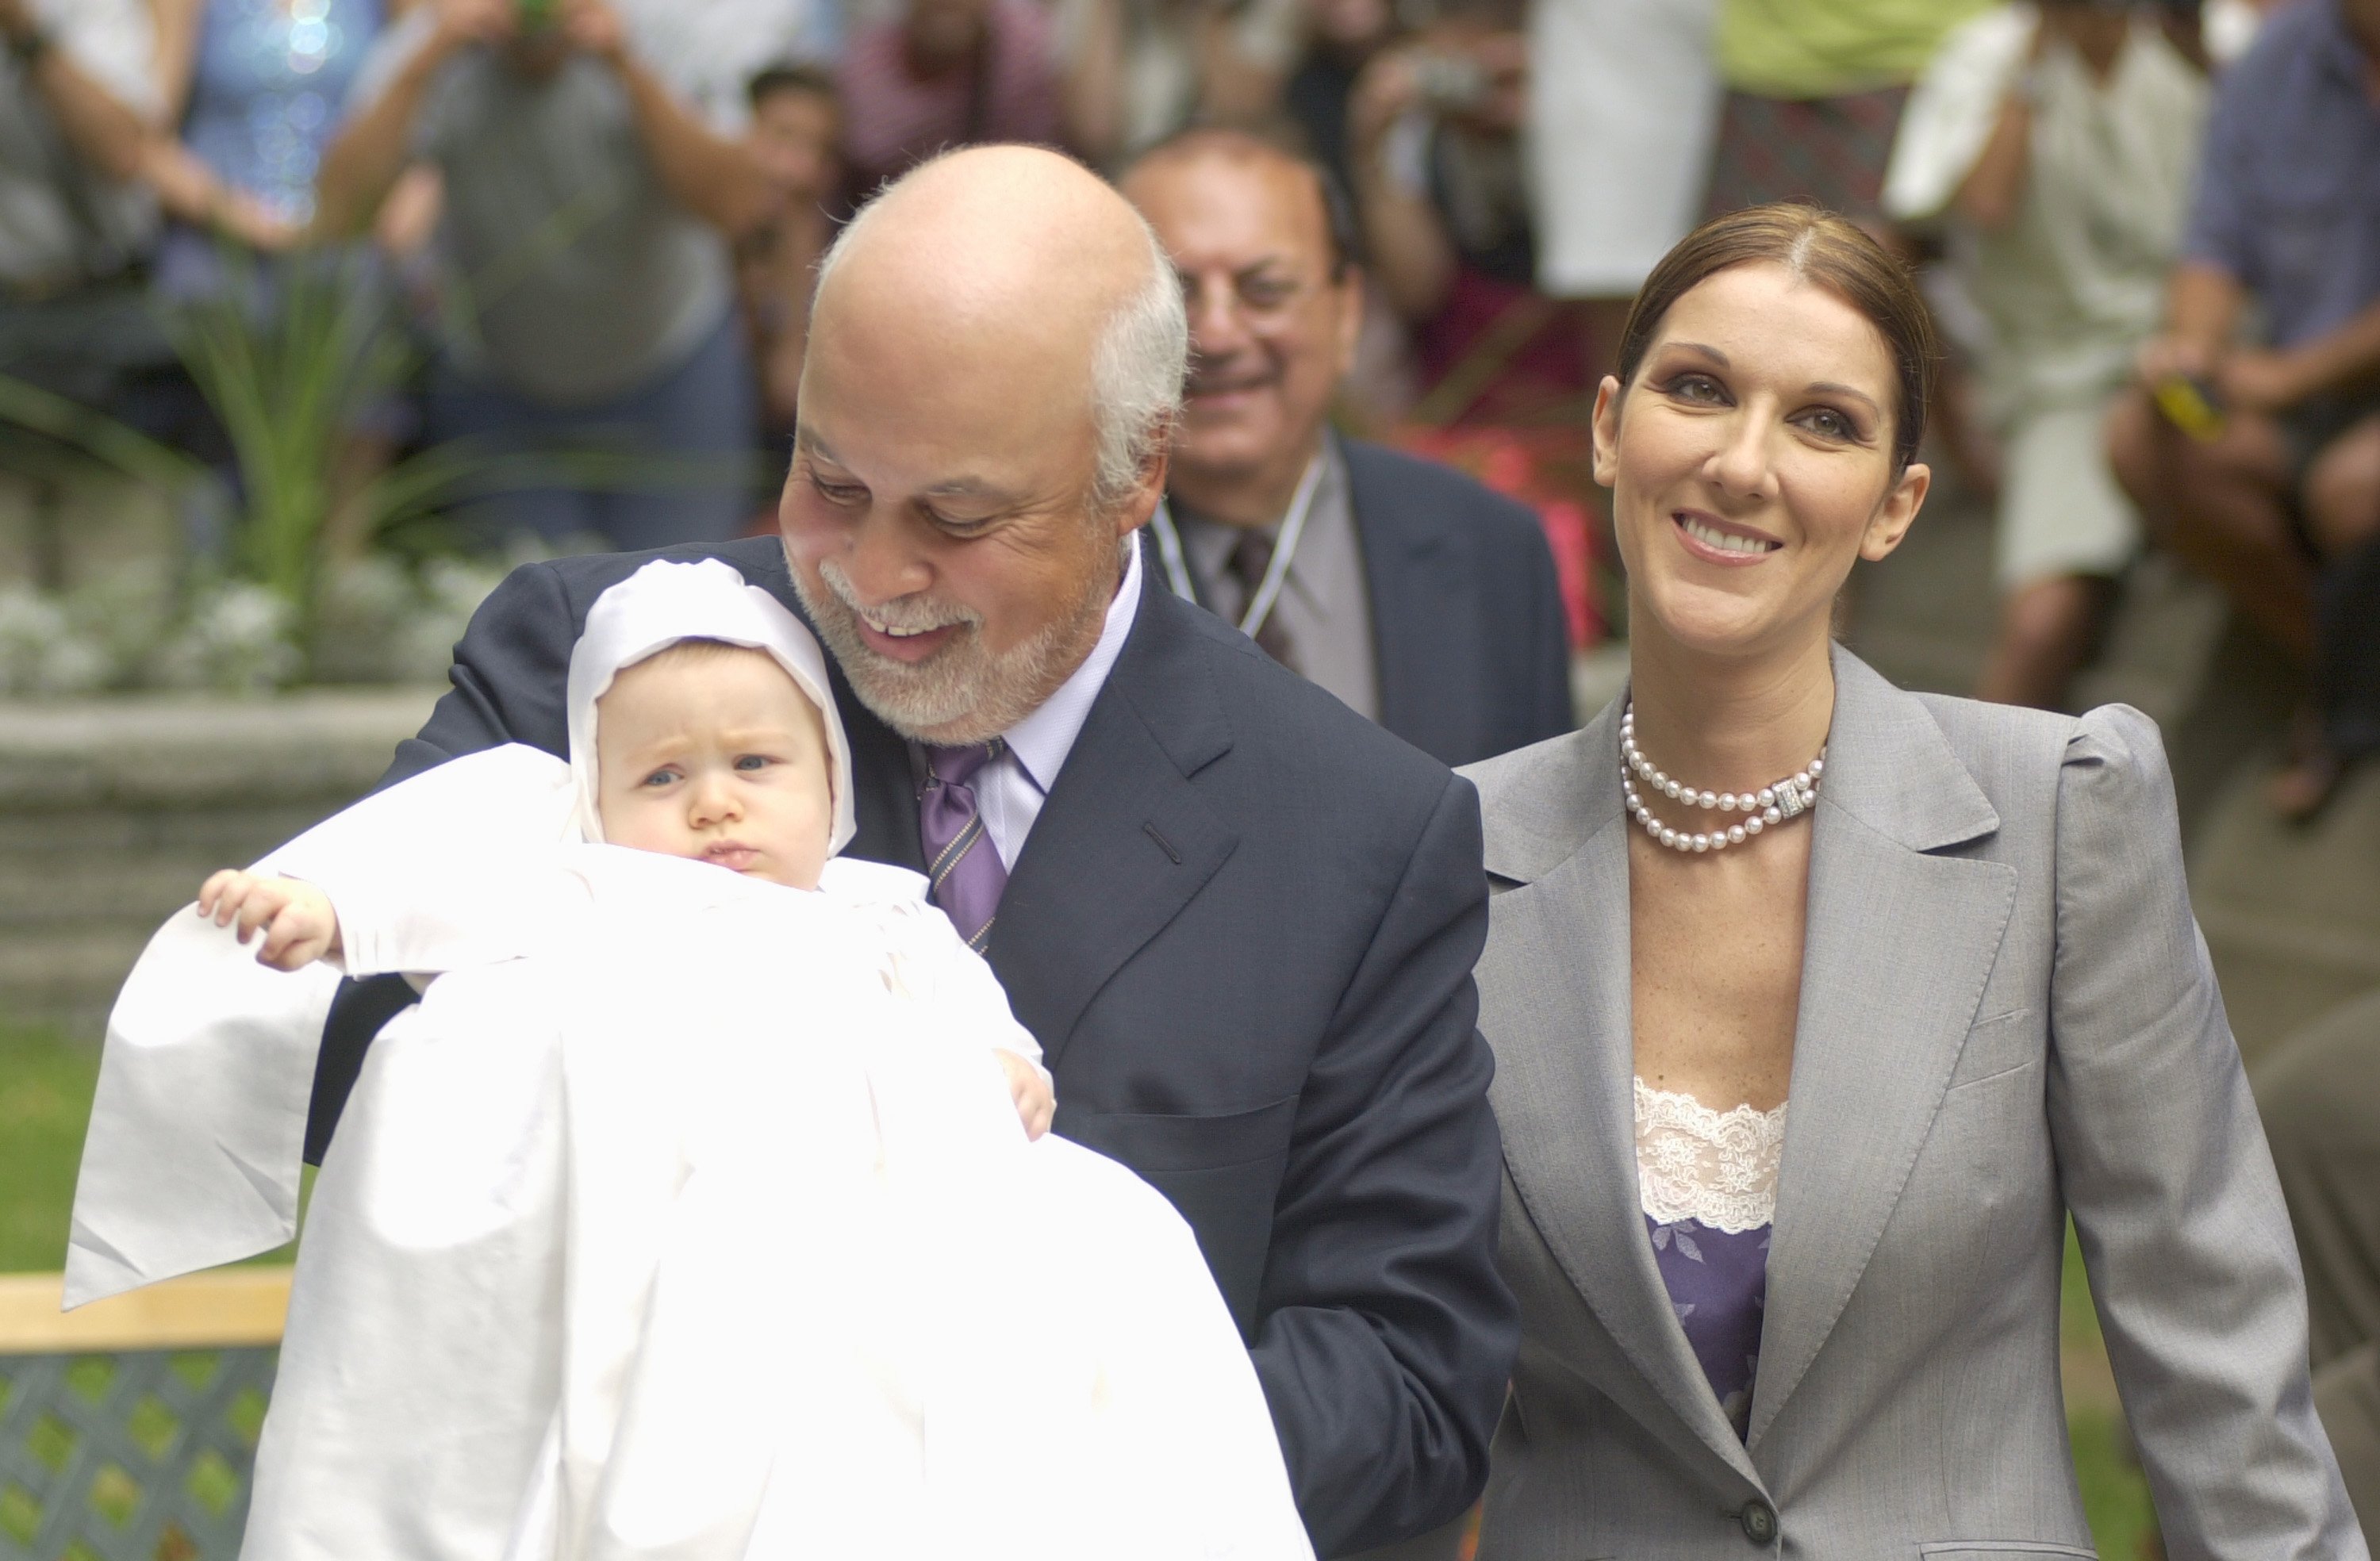 Celine Dion stands next to her husband, Rene Angelil, who holds their baby Rene-Charles July 25, 2001 as they arrive at the chapel of the Notre-Dame Basilica in old Montreal, Quebec before the baptism of their 6-month-old baby boy. | Source: Getty Images.